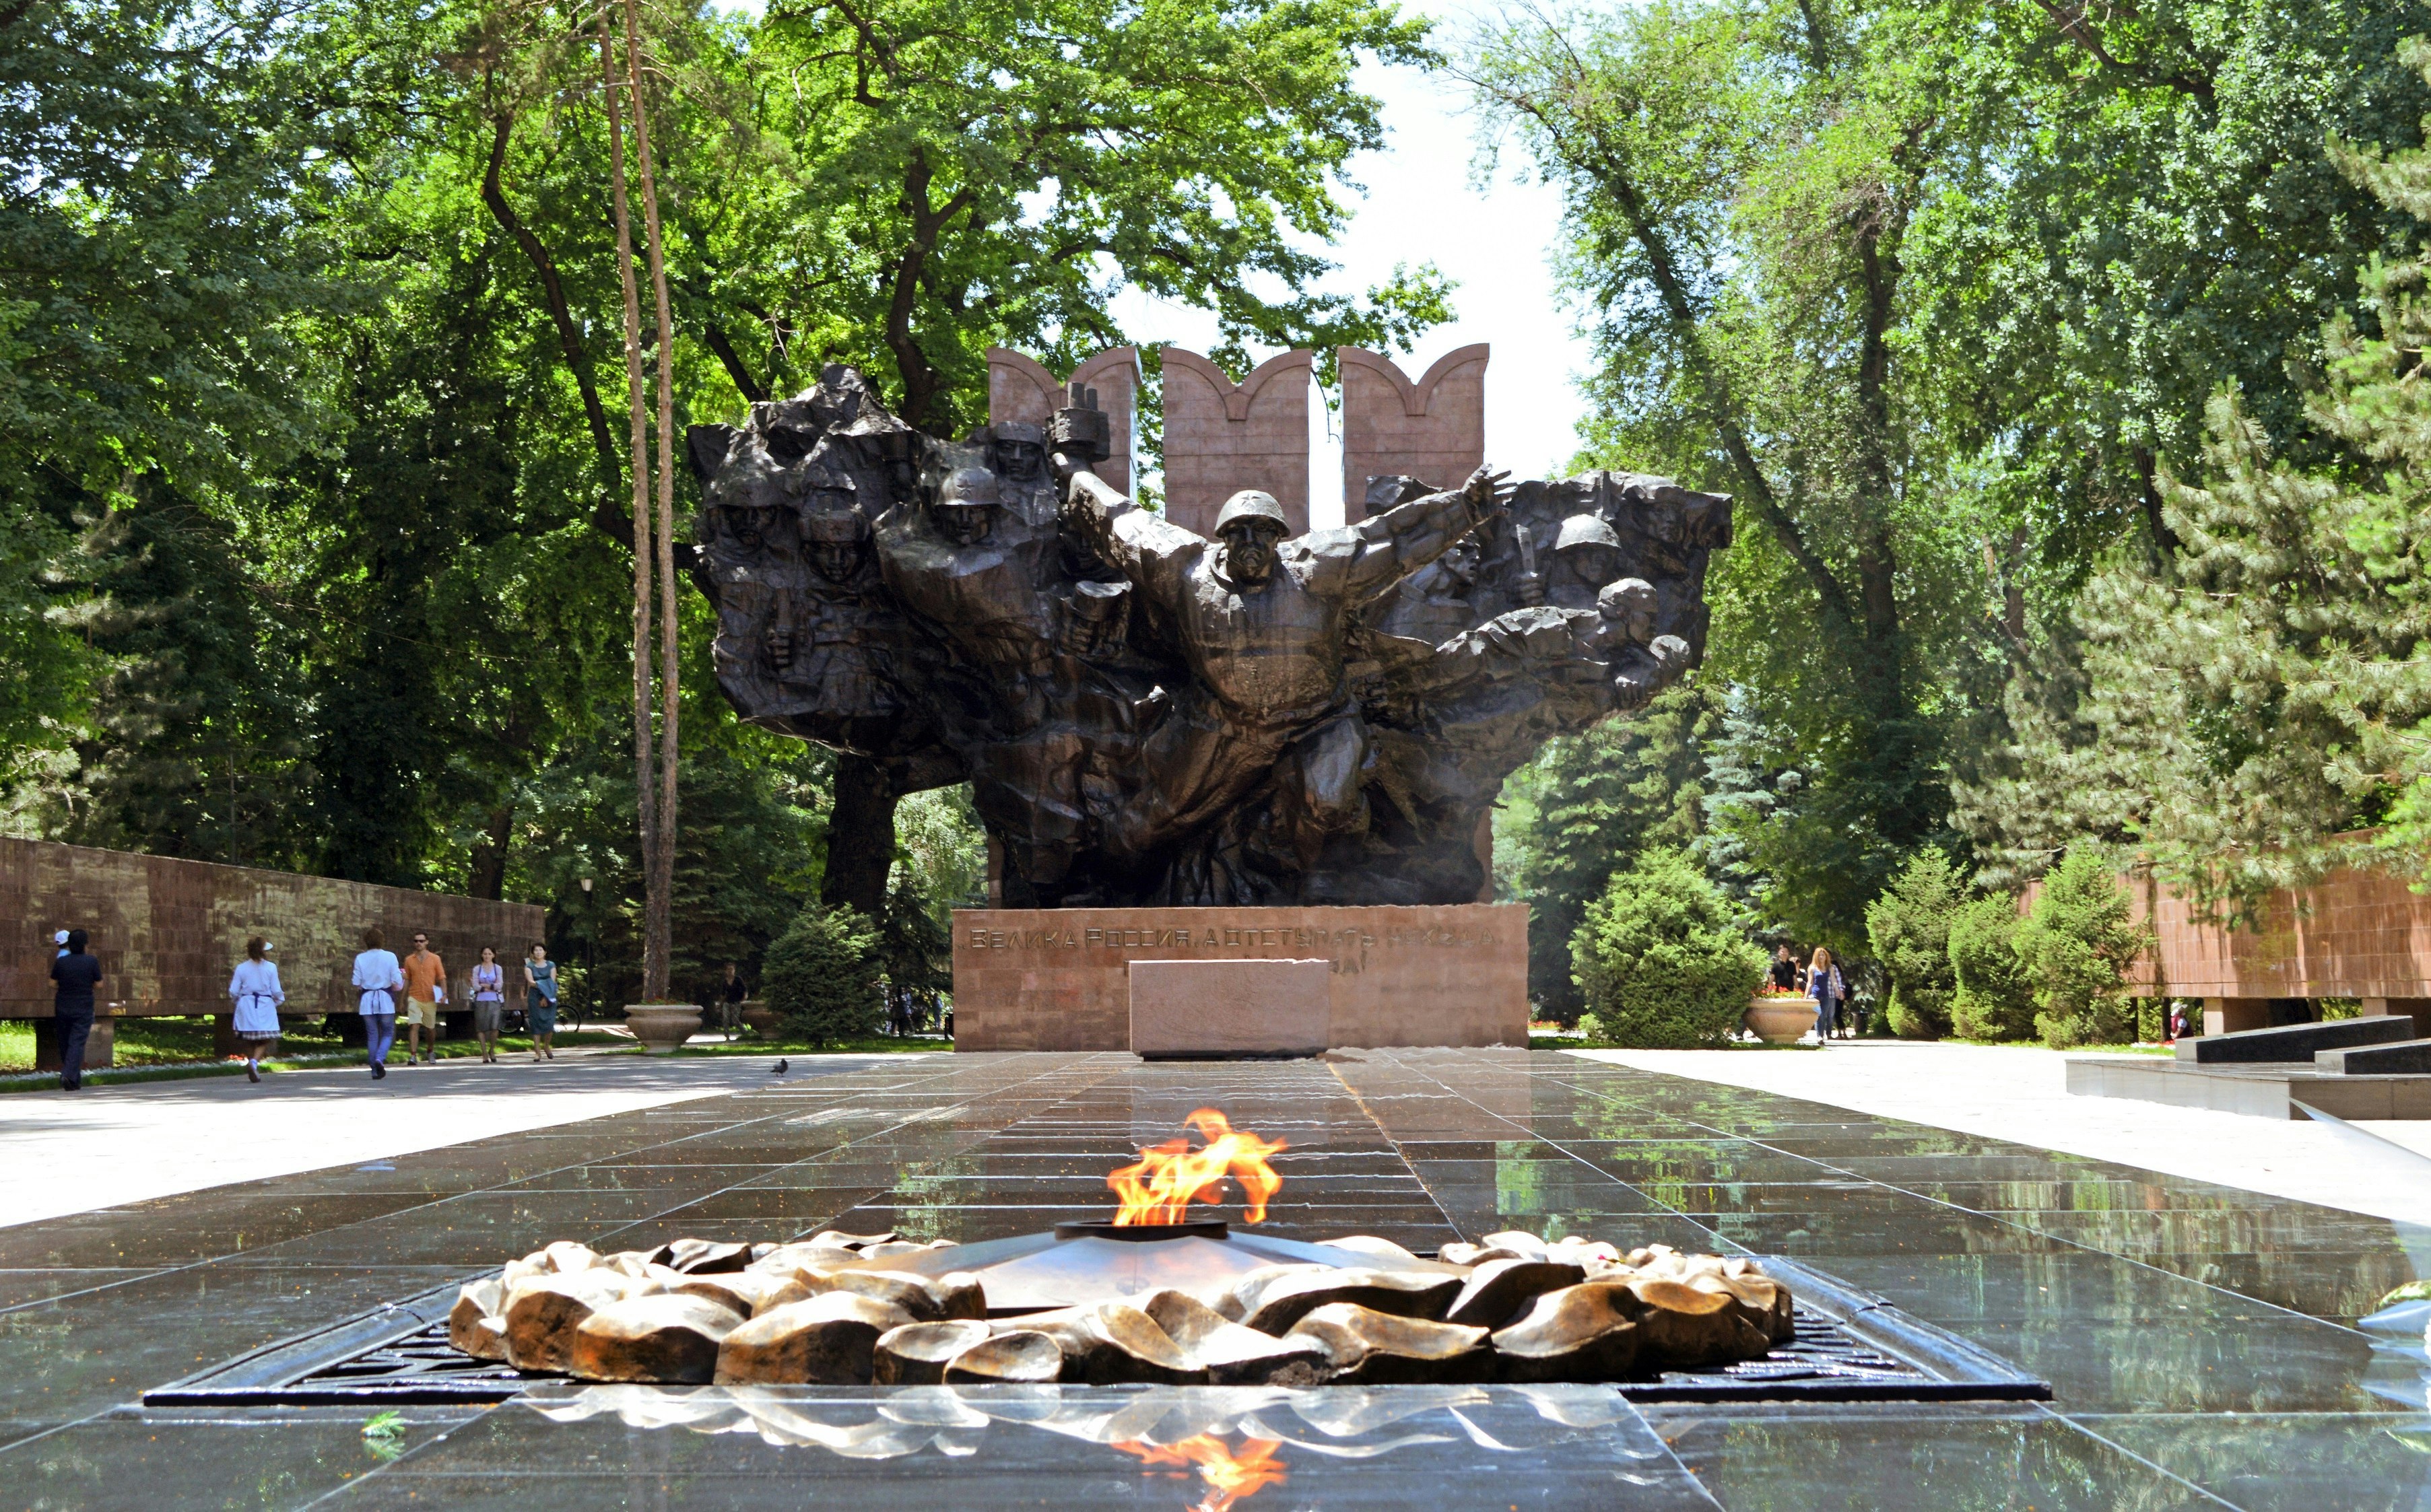 A large black war monument - showing soldiers bursting from a map of the USSR - stands behind a small fire pit; an eternal flame honouring solders who lost their lives in conflict. Behind the monument, trees and other greenery is visible.